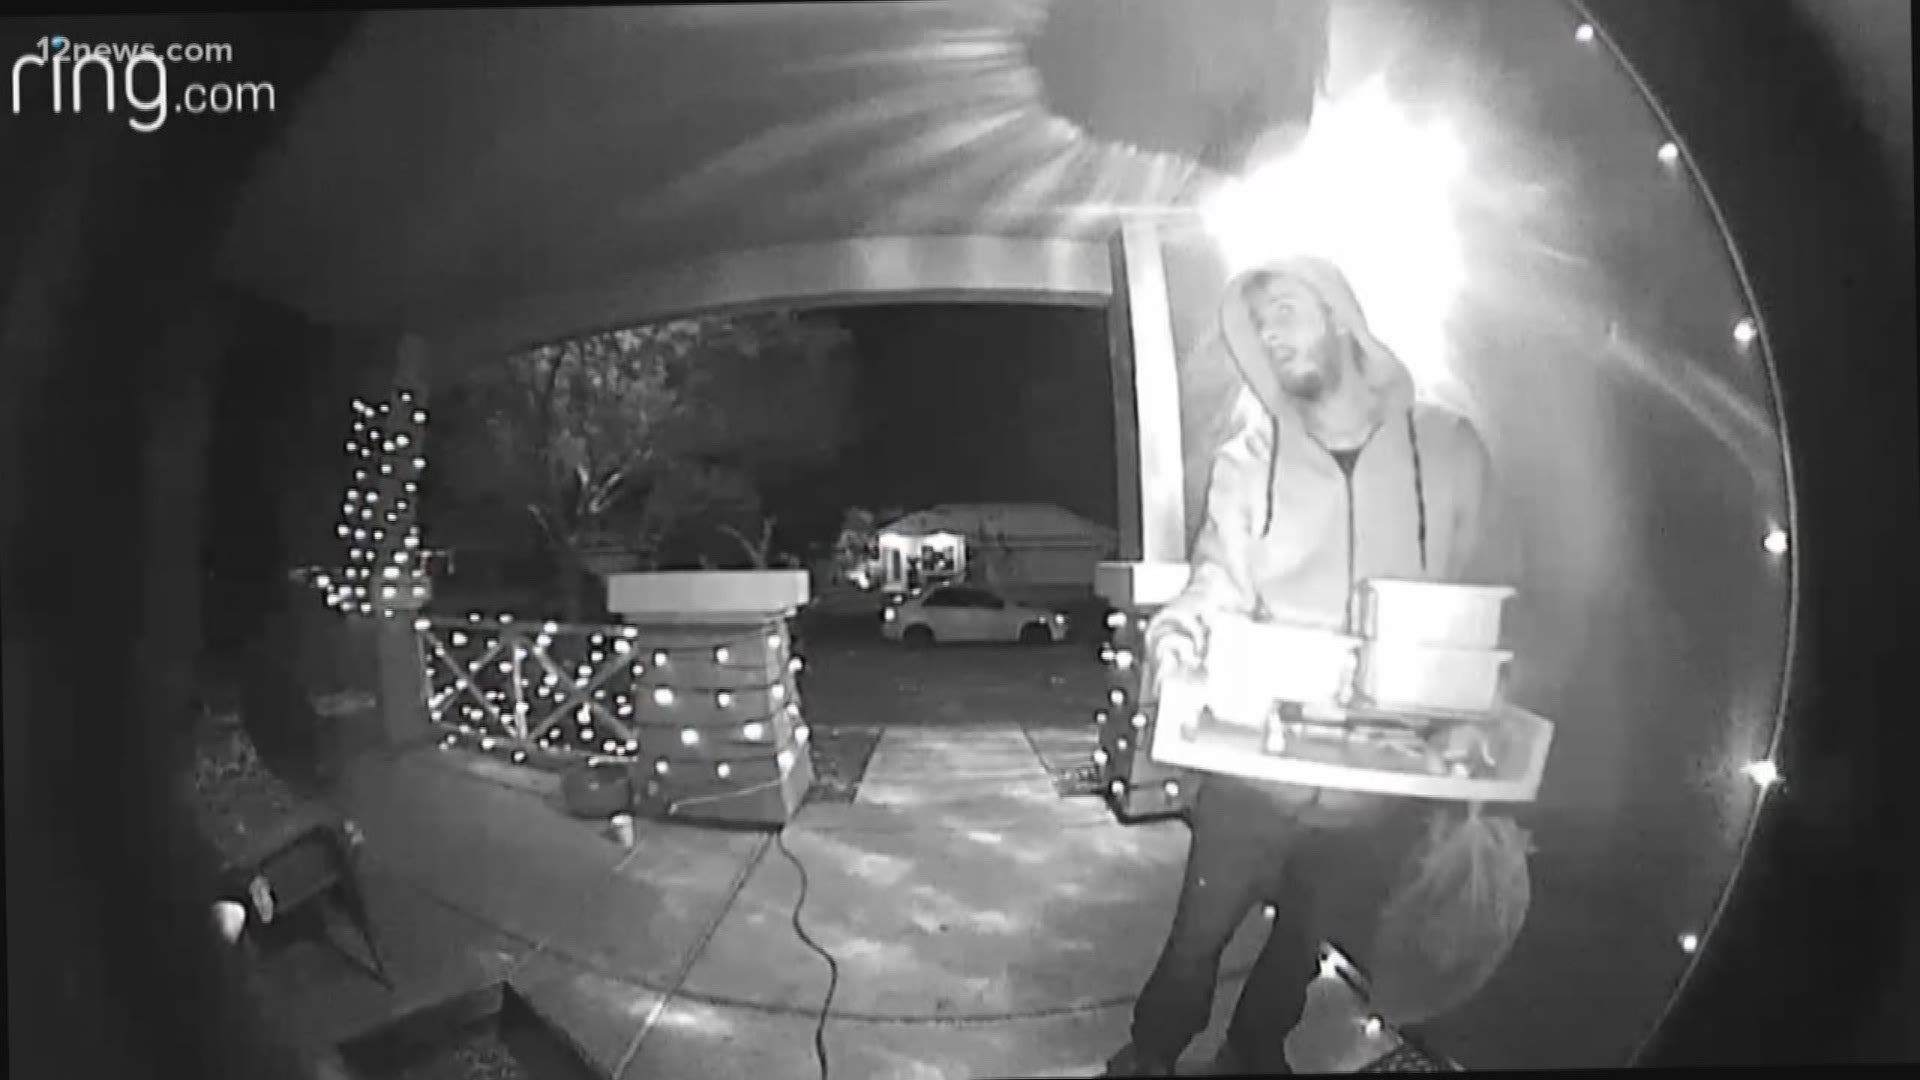 Surveillance video showed a man taking Christmas gifts from a mother's car trunk and police want him caught.